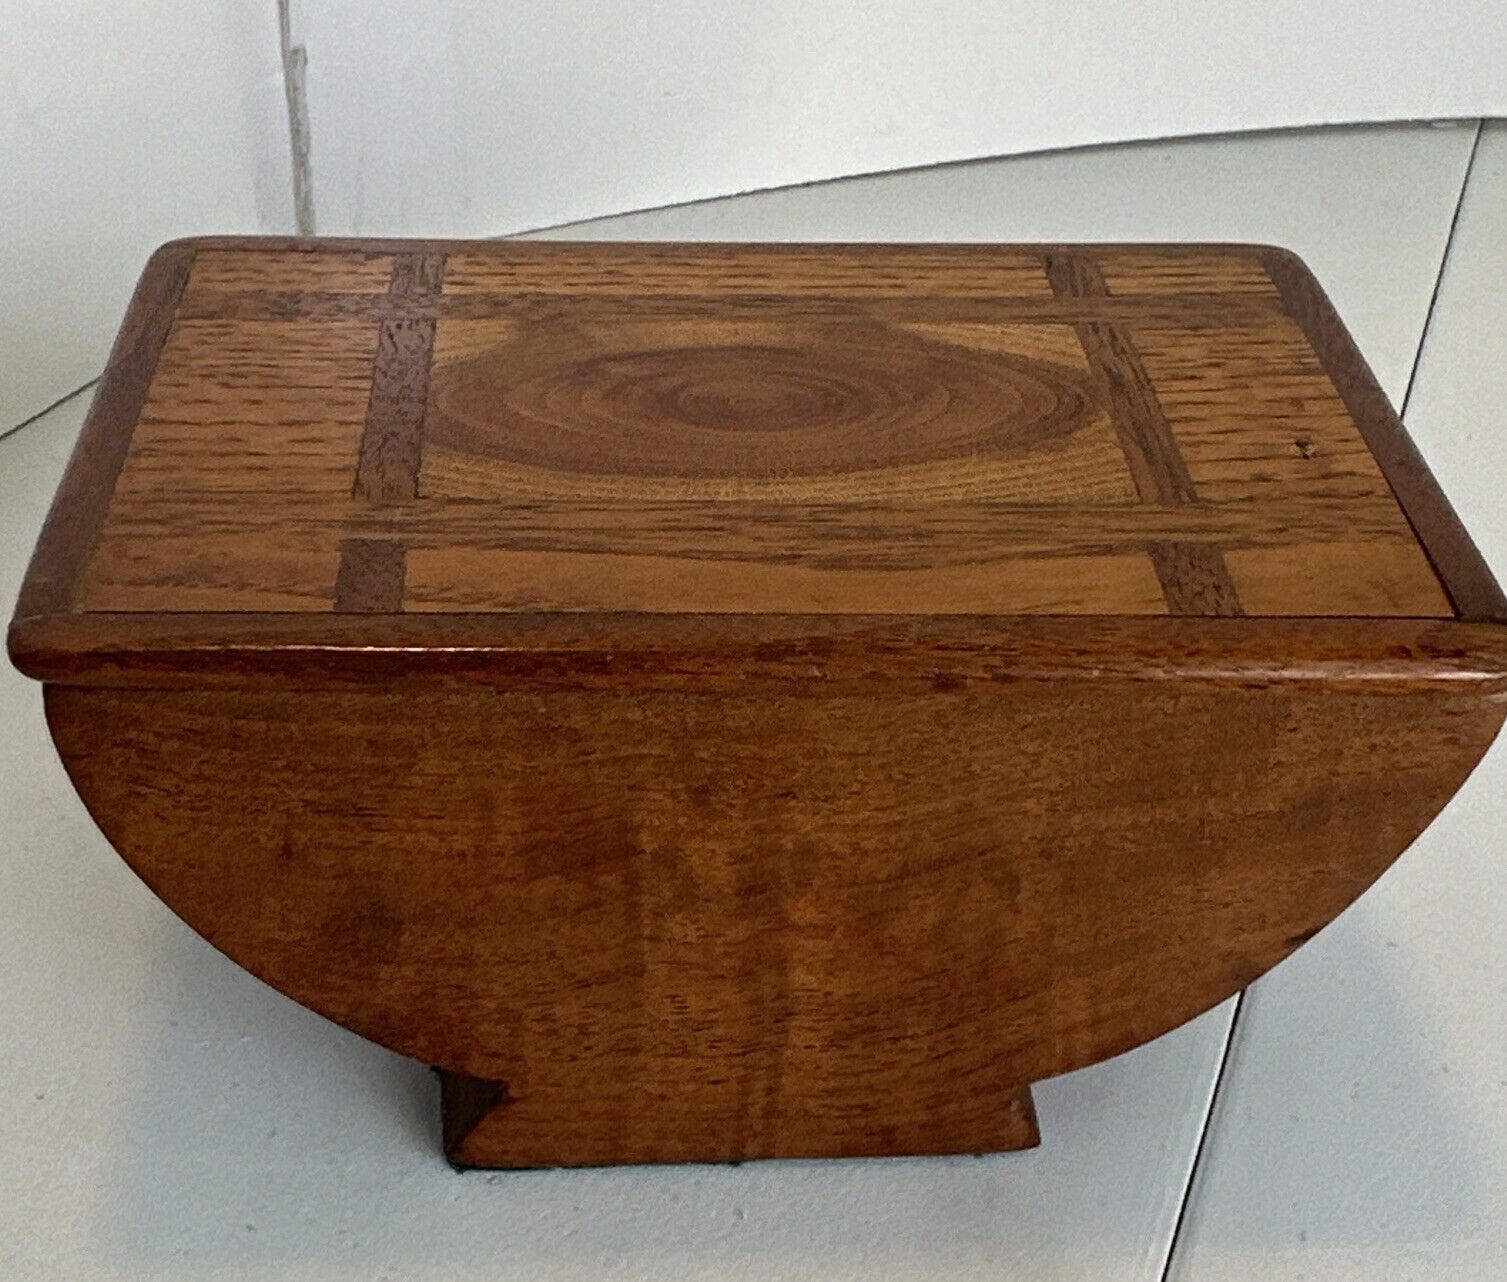 Unique Wood Carved Wood Inlay Vintage Box With Lid 3” By 3.5” By 5.5”